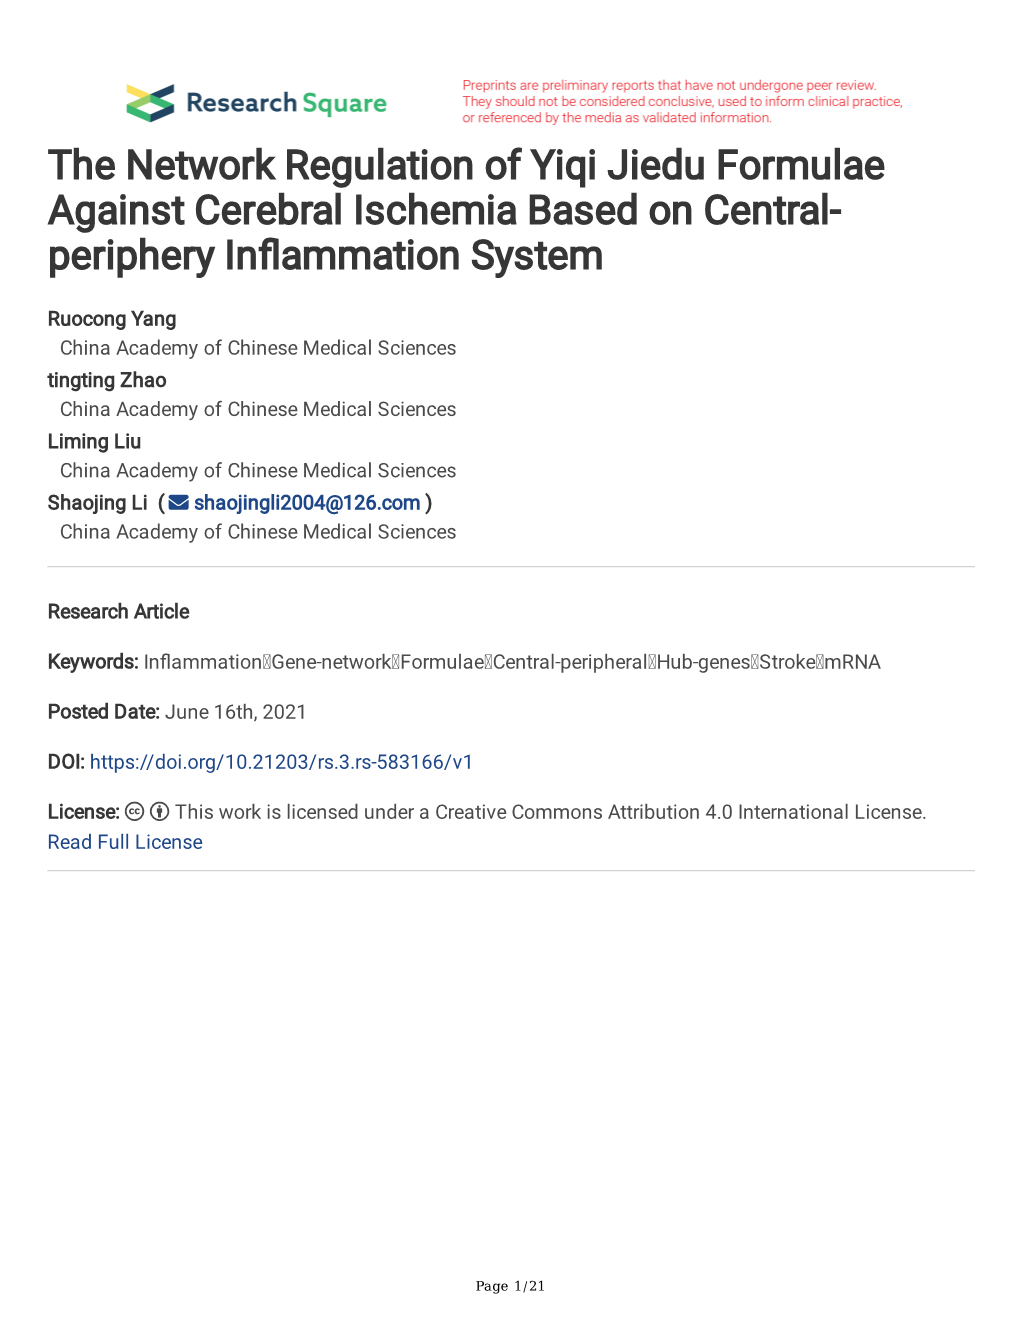 The Network Regulation of Yiqi Jiedu Formulae Against Cerebral Ischemia Based on Central- Periphery Infammation System